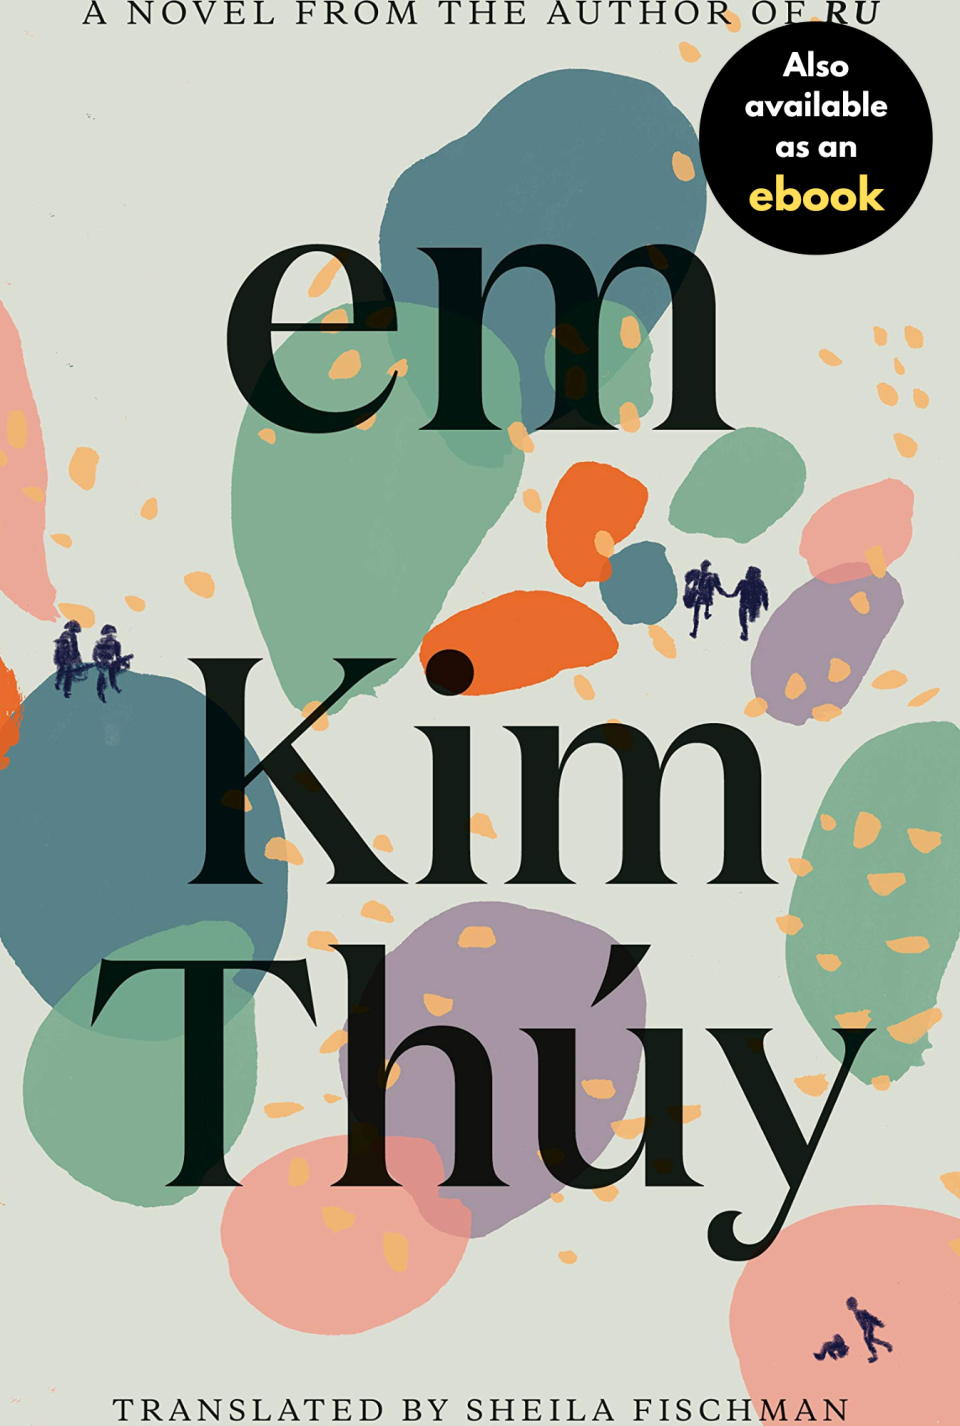 Shows the cover art for Em by Kim Thúy